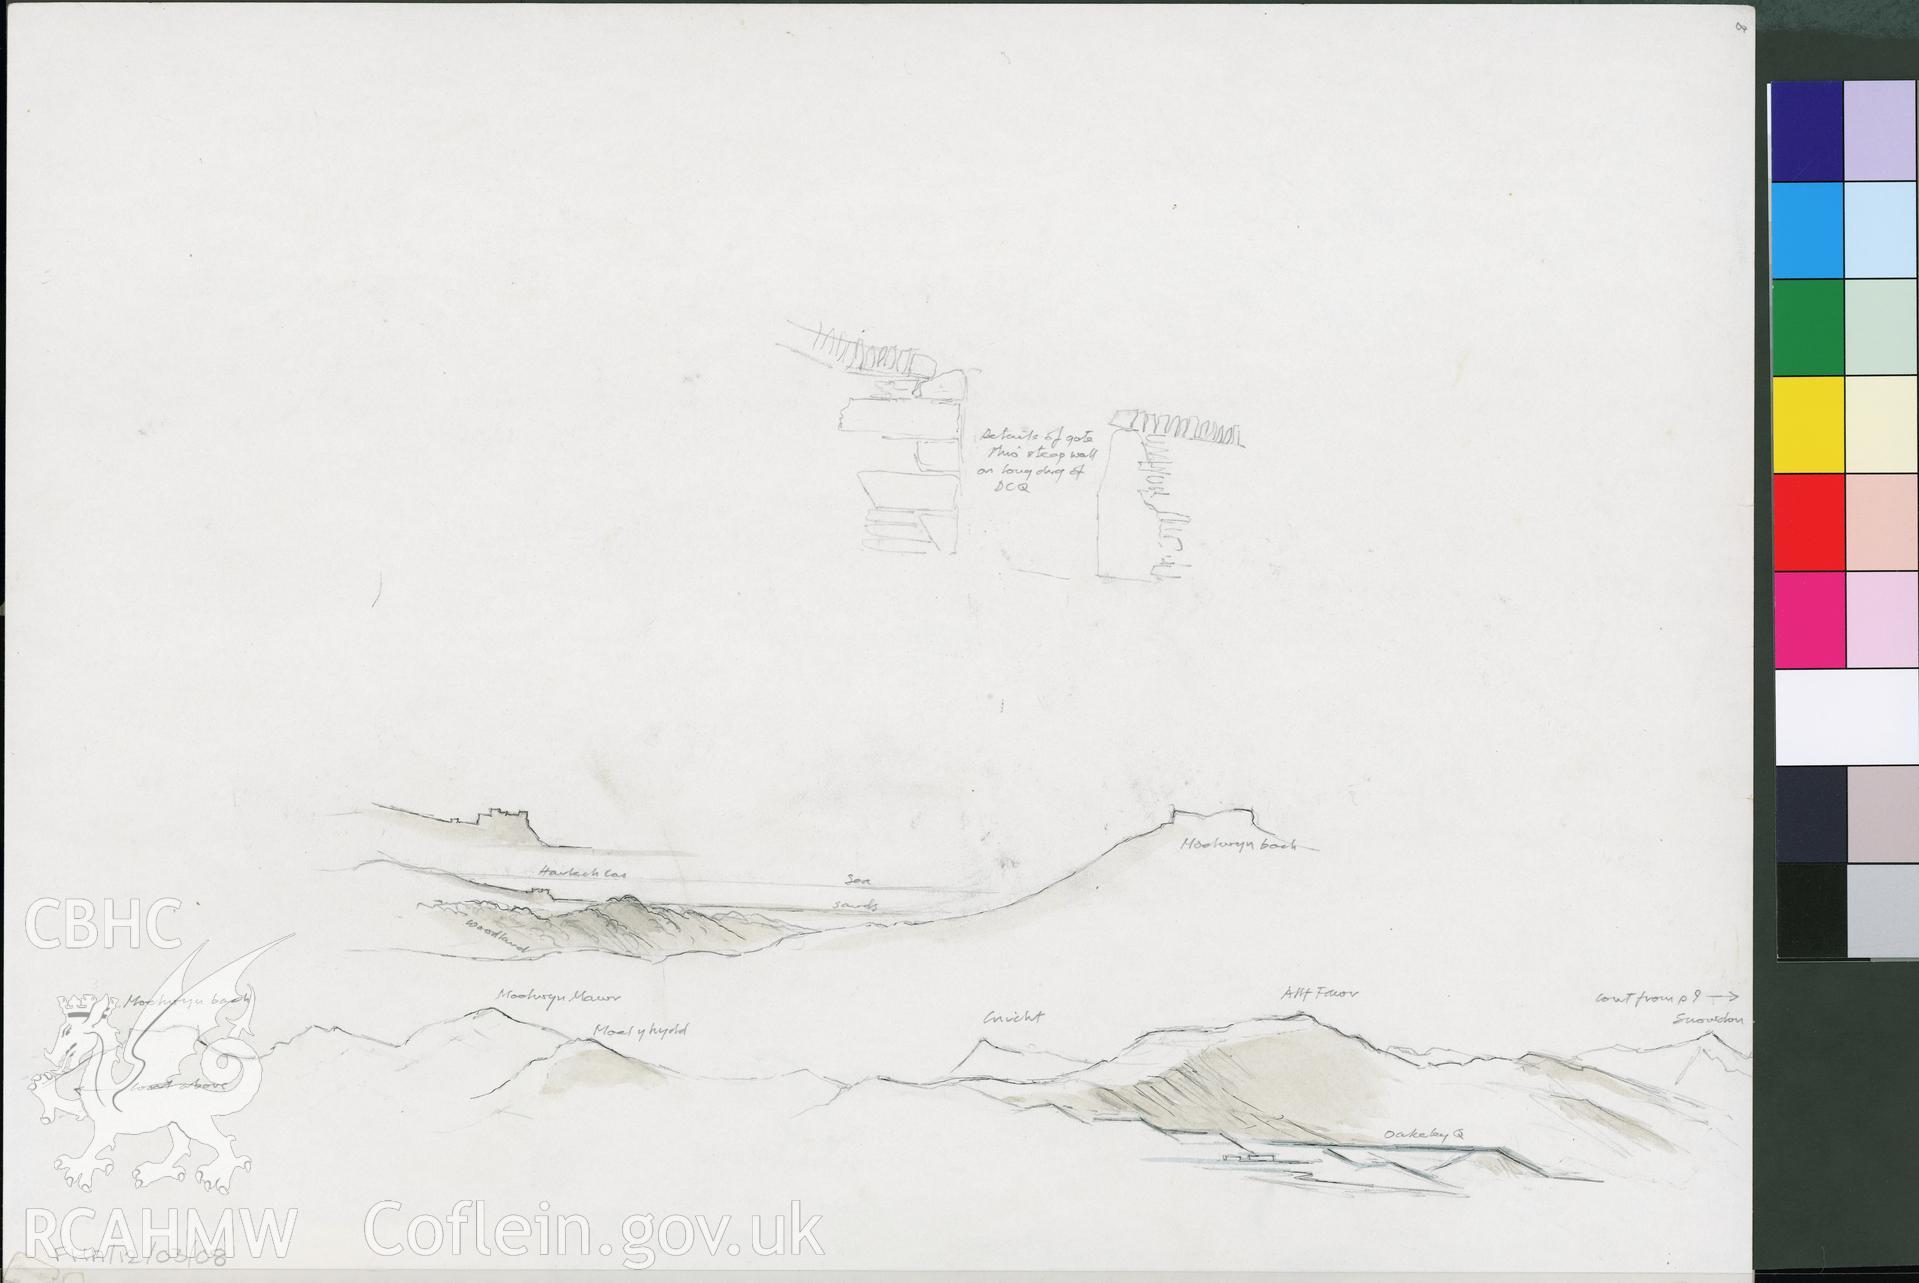 Preliminary sketch showing partial profile of of Snowdonia, produced by Falcon Hildred, July 1999.